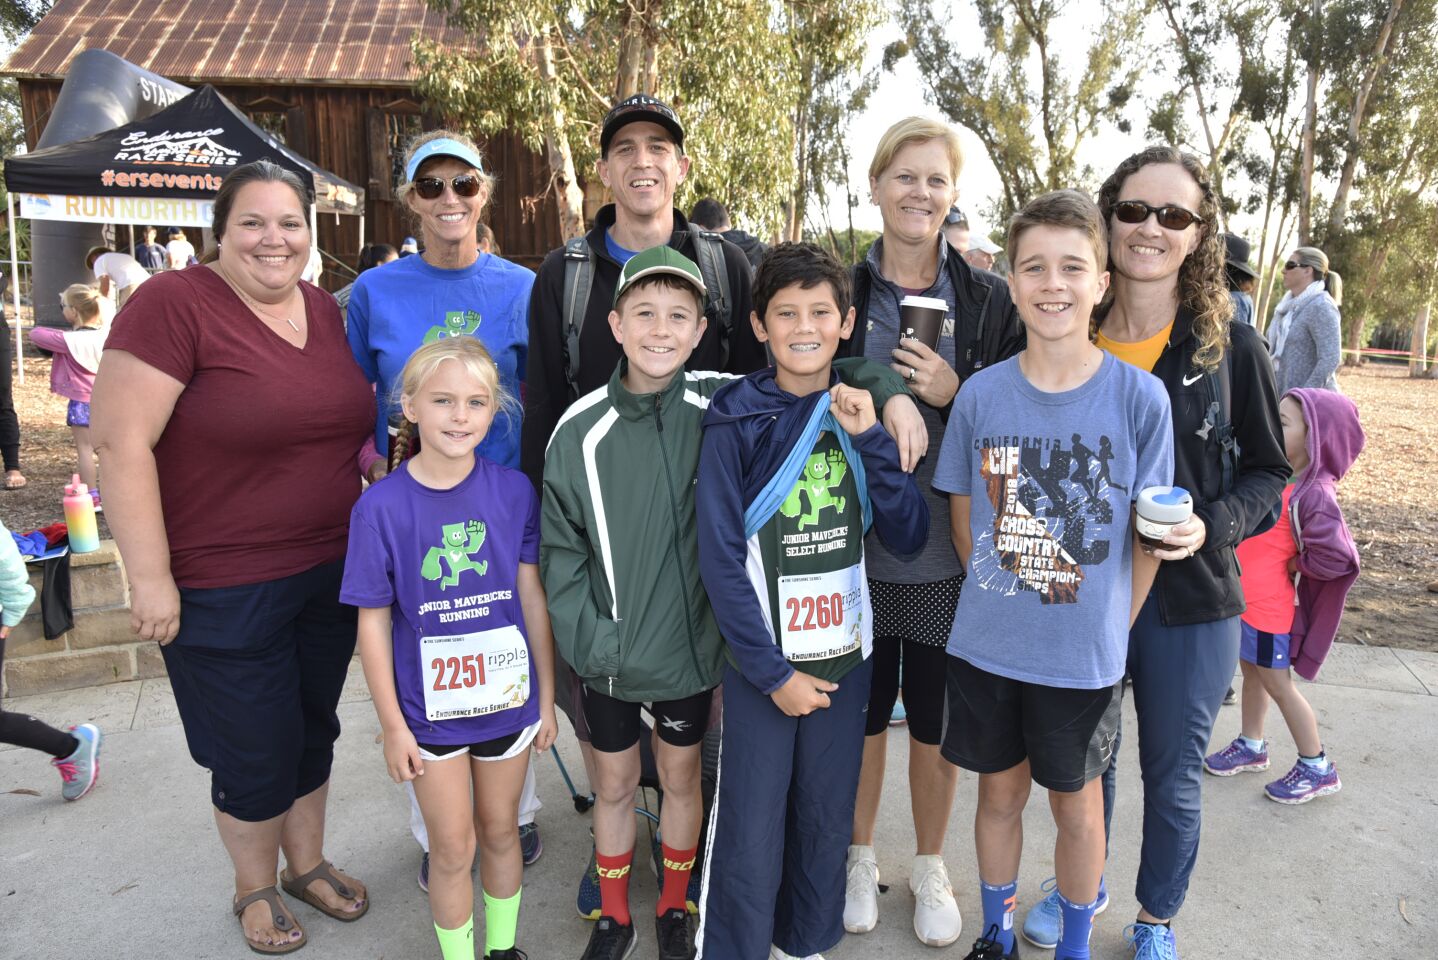 Junior Maverick runners and supporters